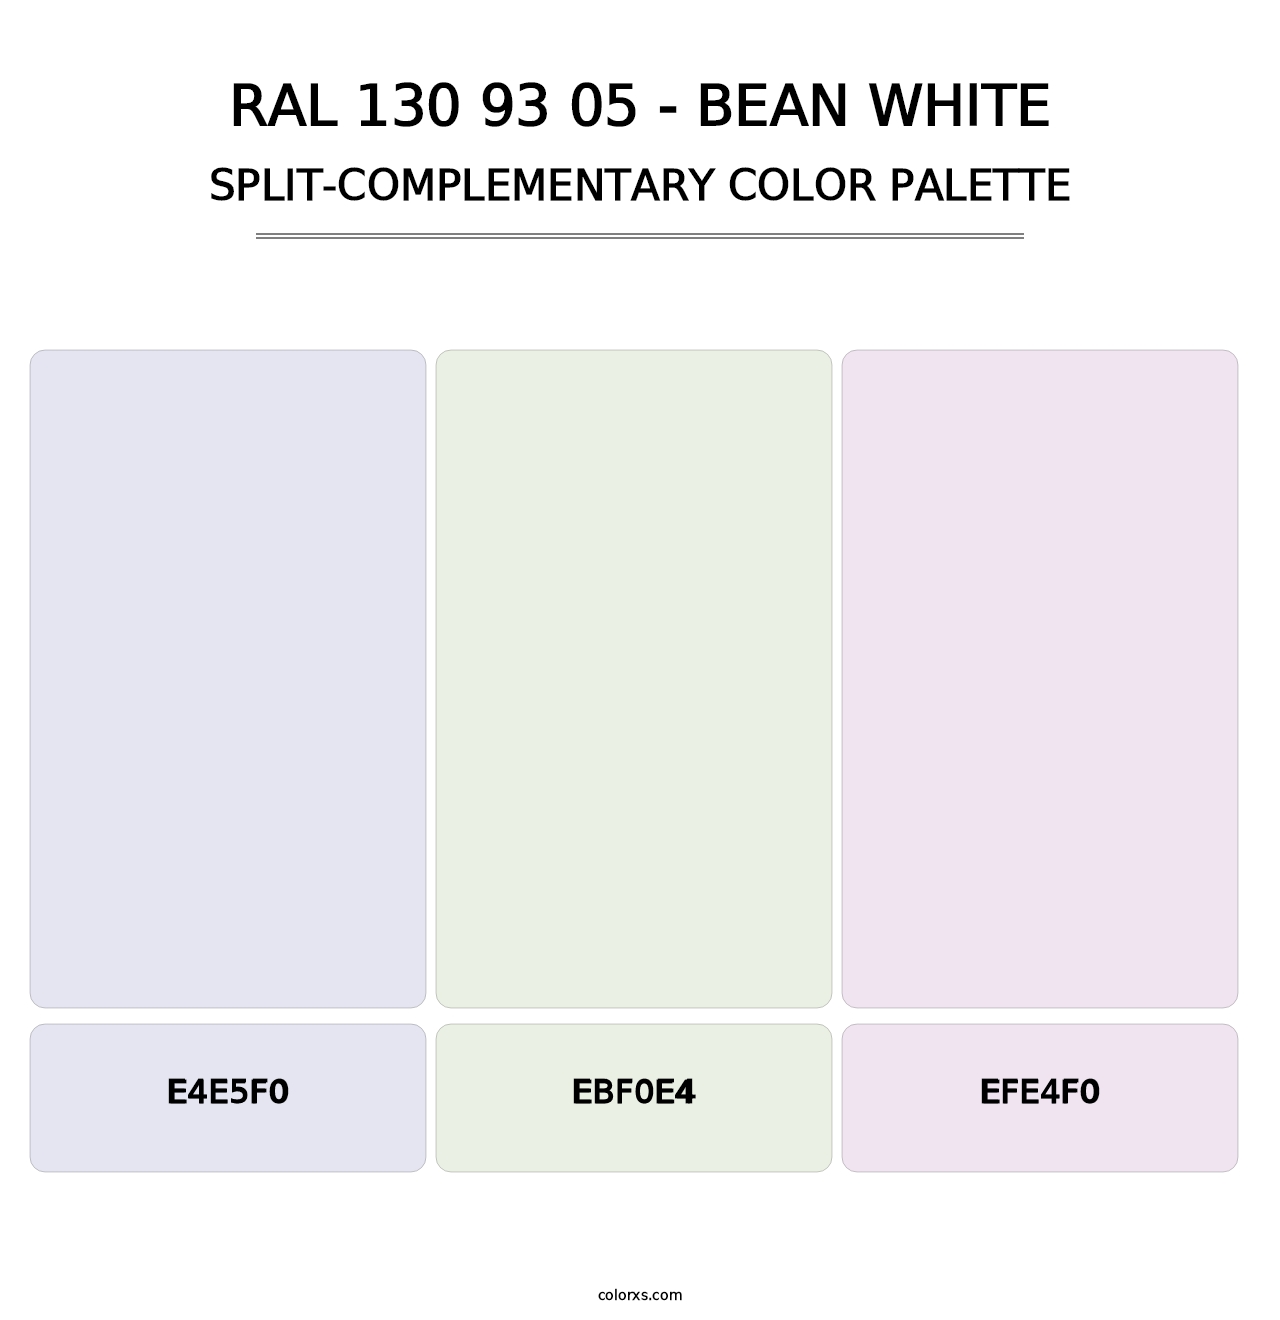 RAL 130 93 05 - Bean White - Split-Complementary Color Palette